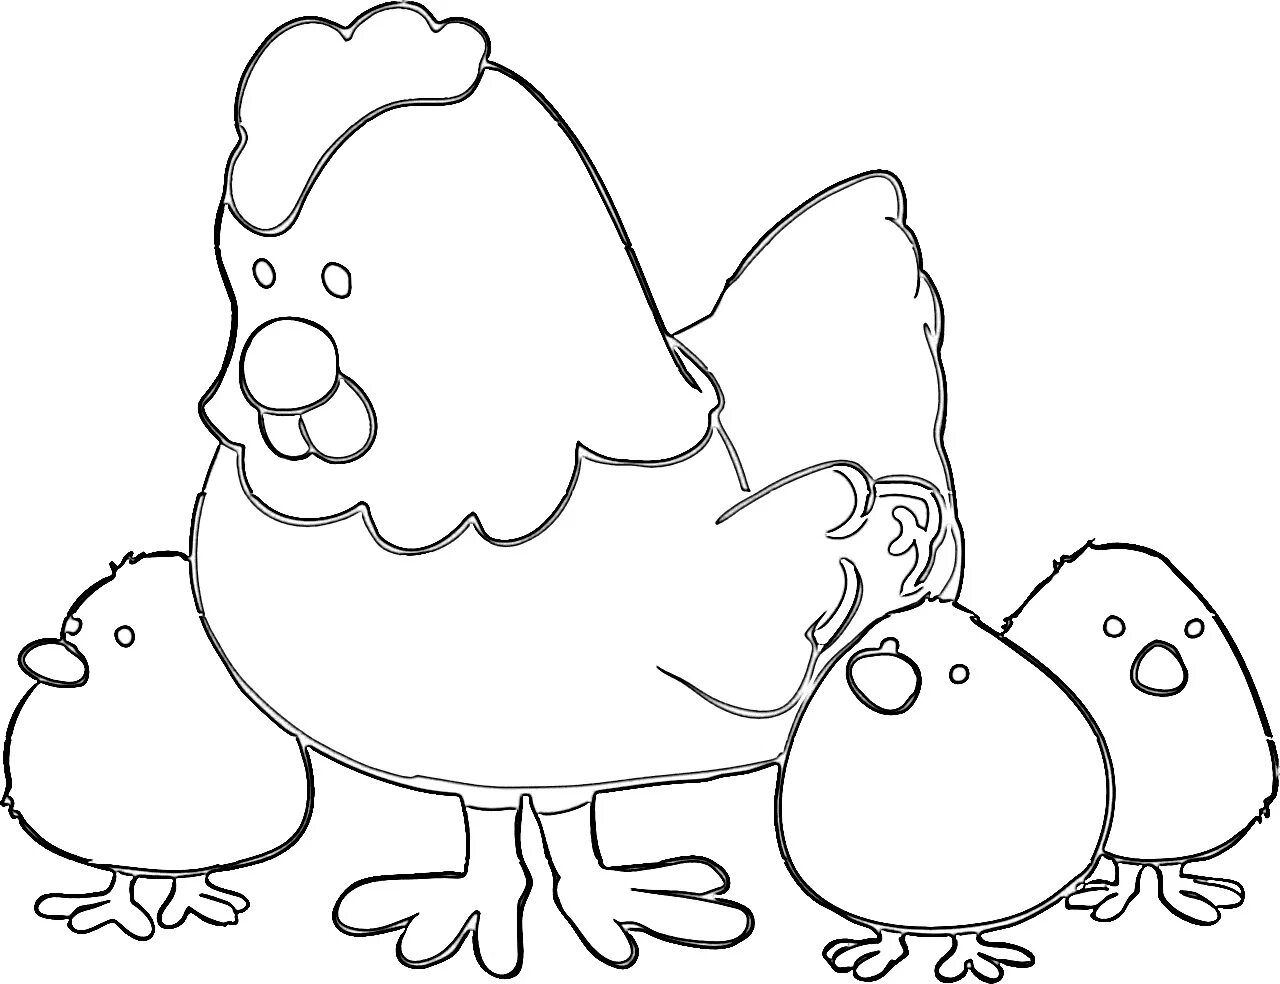 Chicken Animated Coloring Pages for Kids